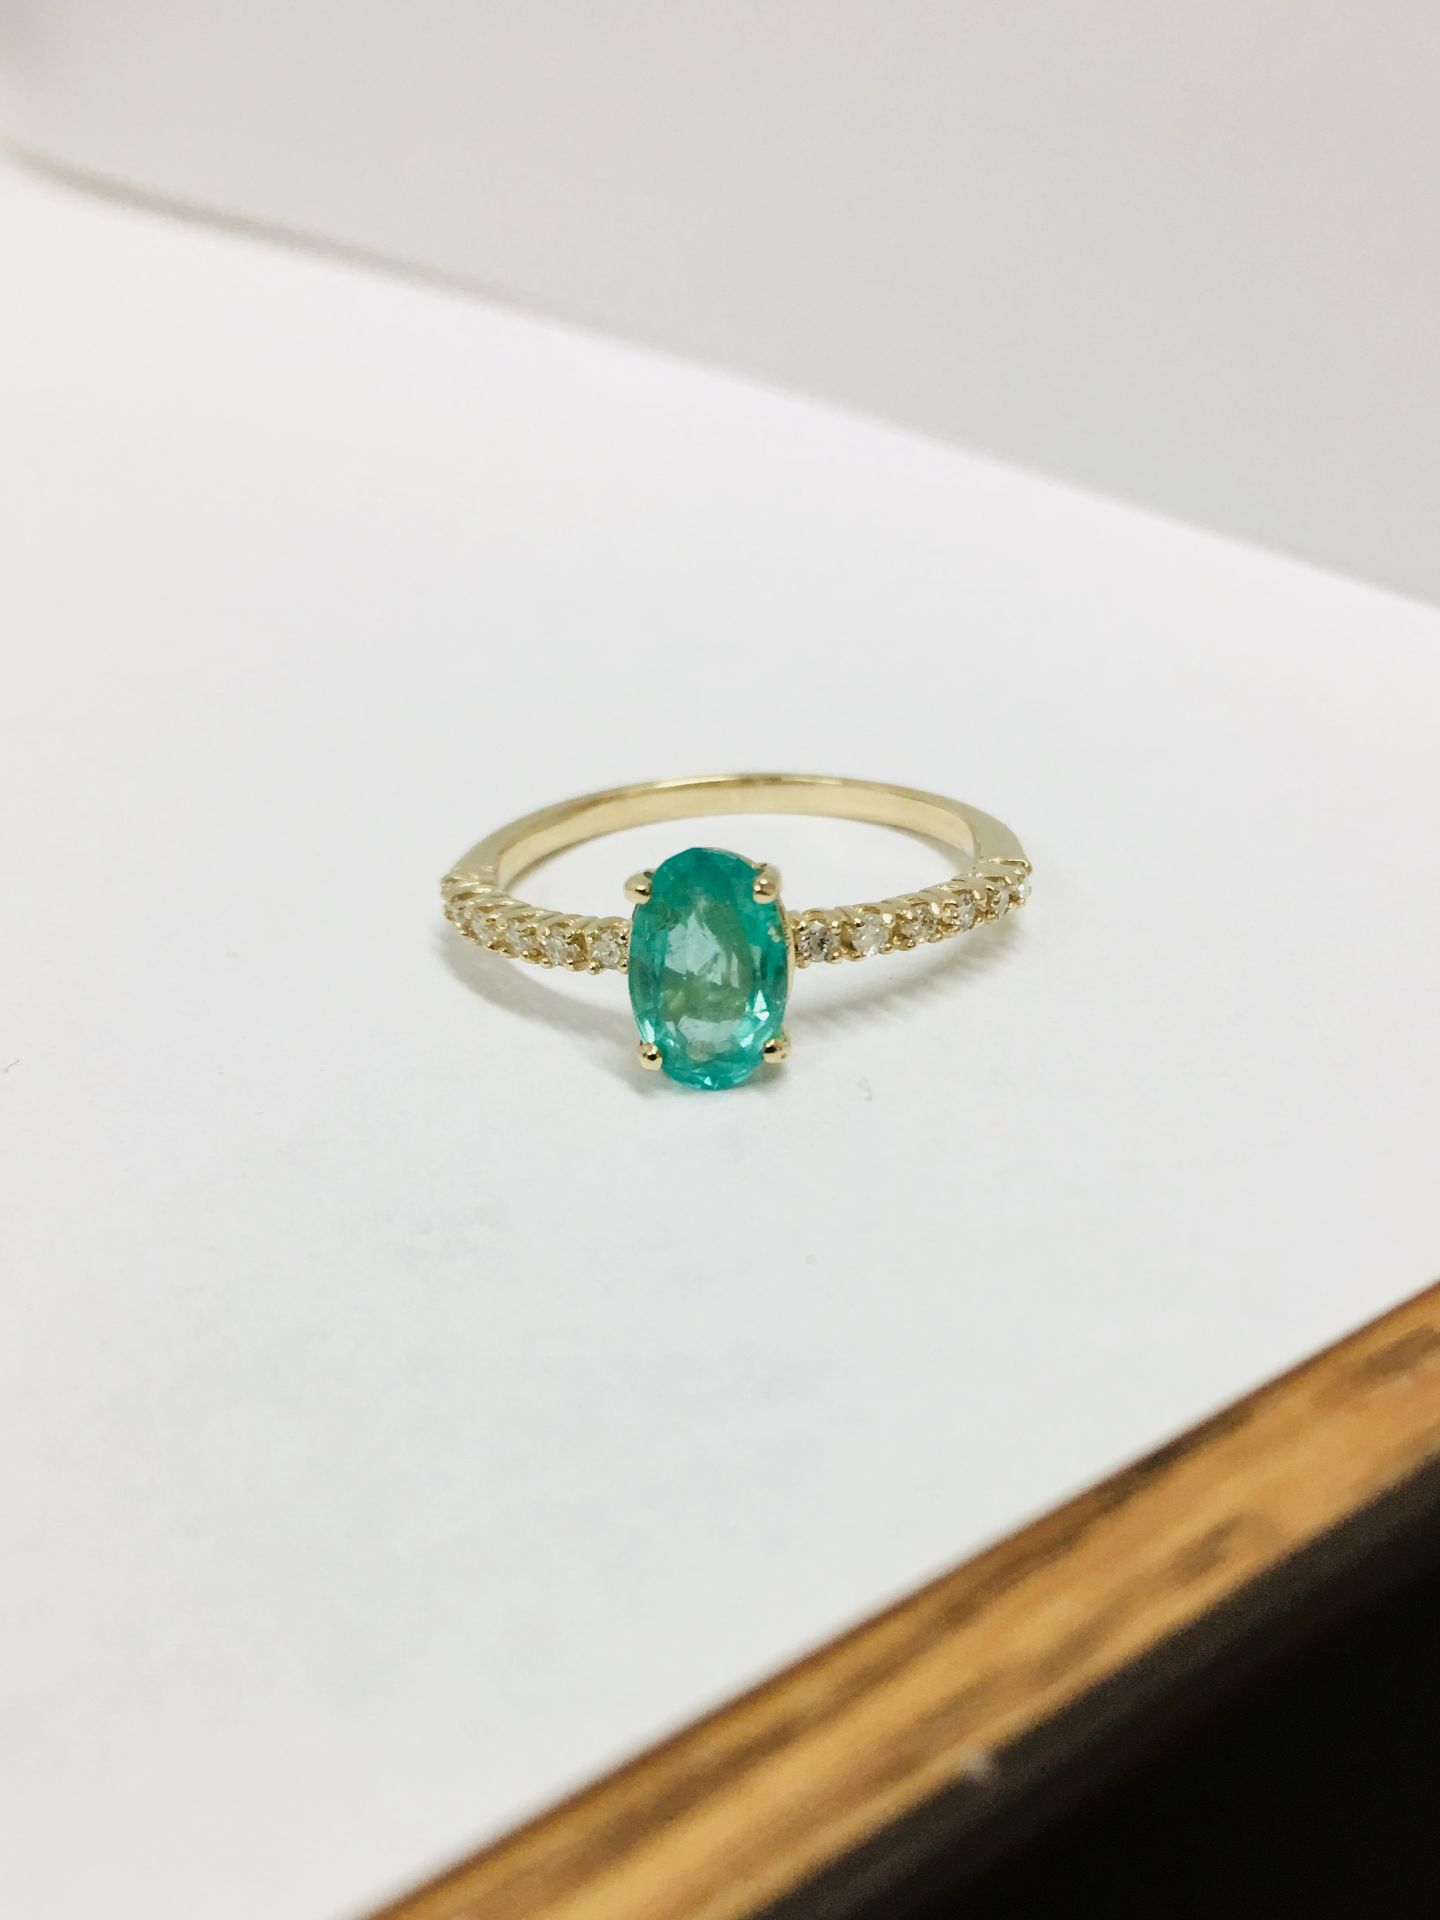 0.80Ct / 0.12Ct Emerald And Diamond Dress Ring. - Image 2 of 4